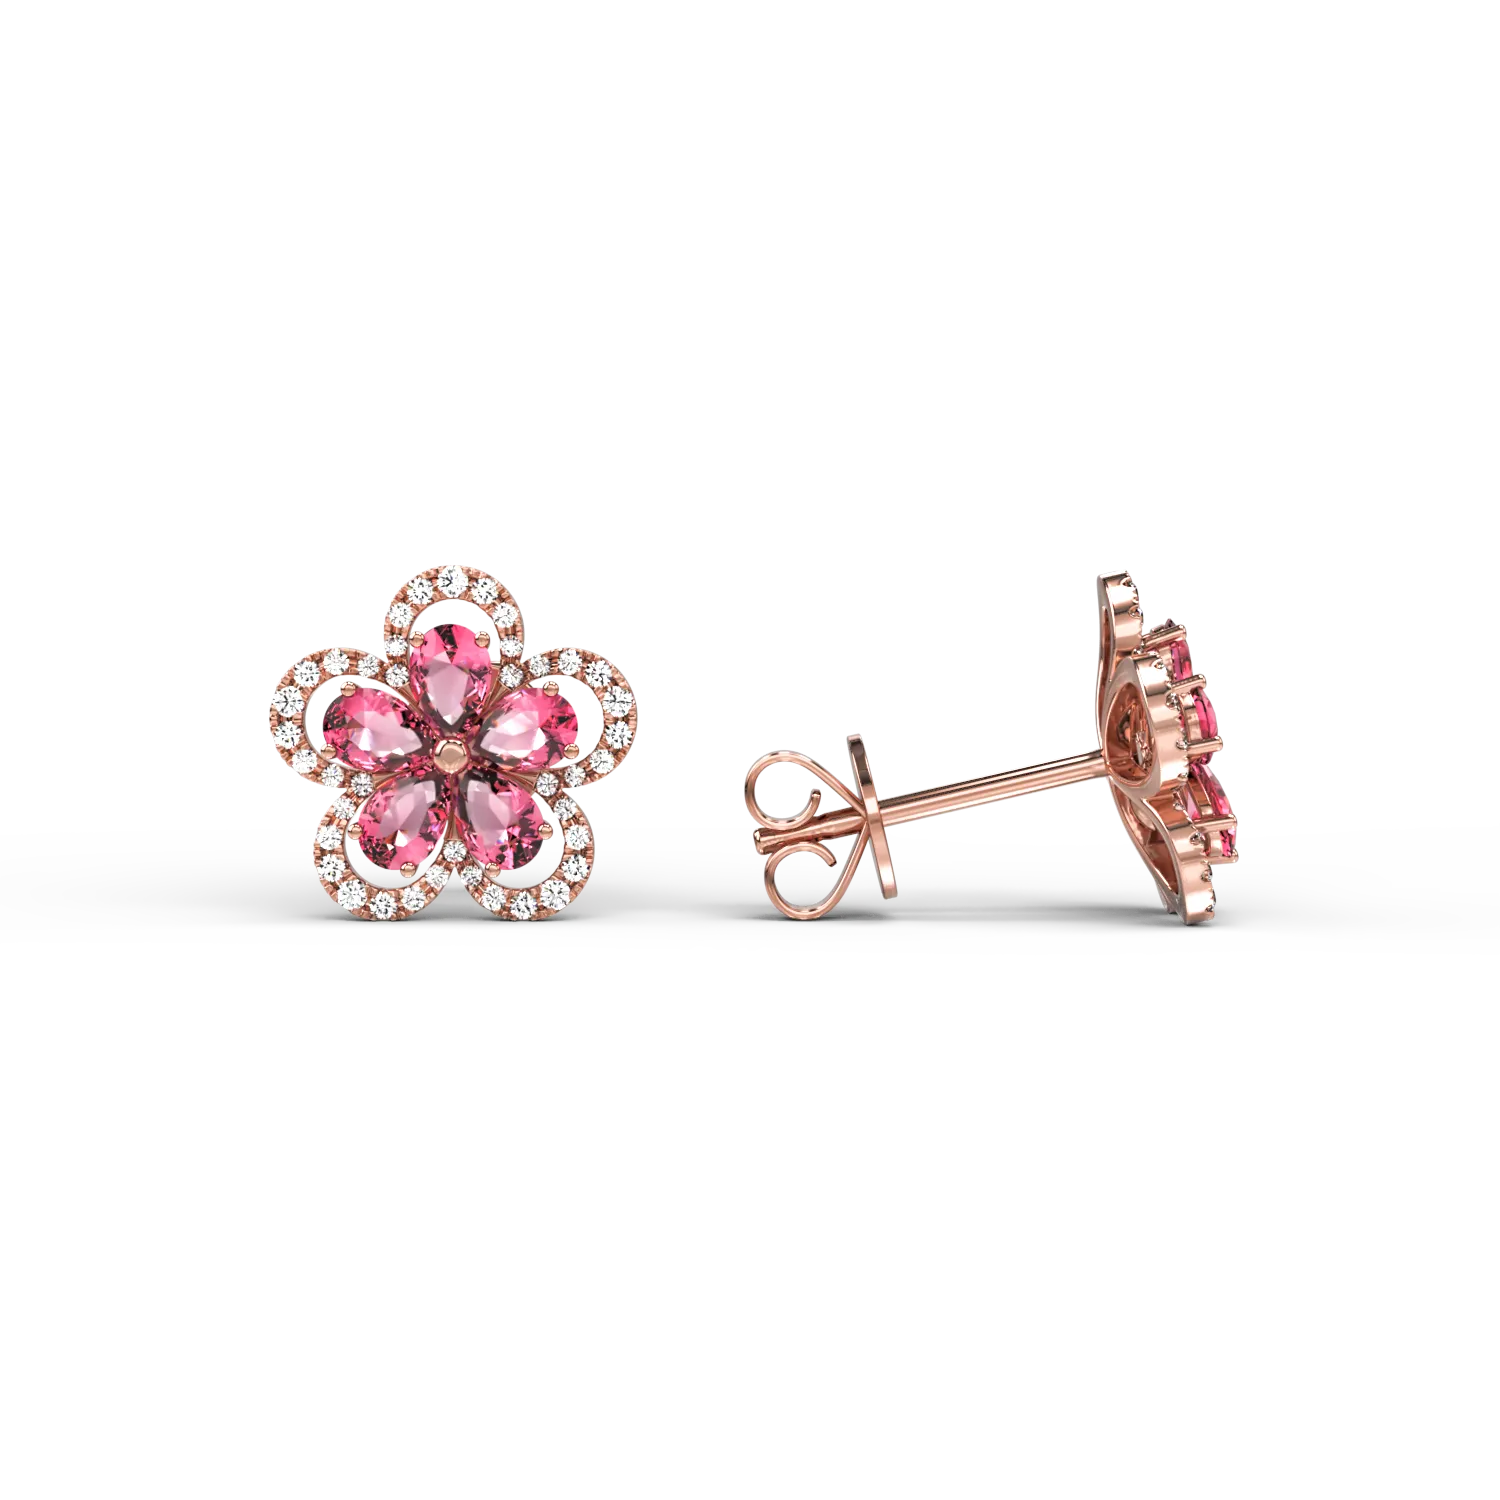 18K rose gold flower earrings with pink tourmalines of 2.1ct and diamonds of 0.29ct